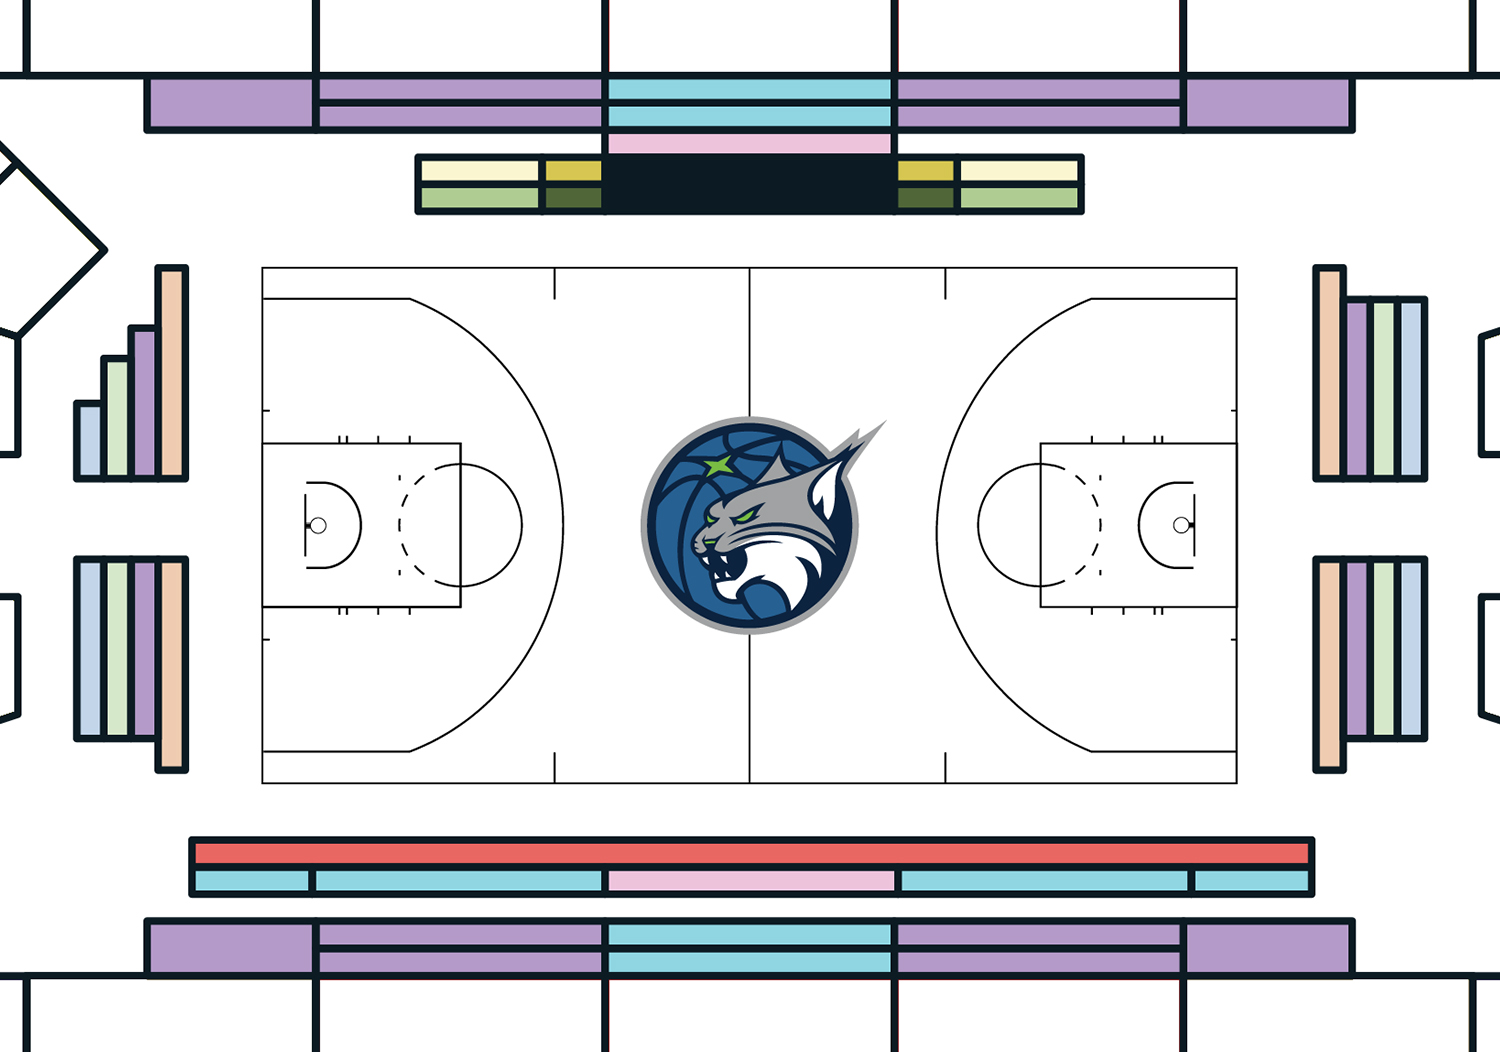 Courtside Club Seating Map